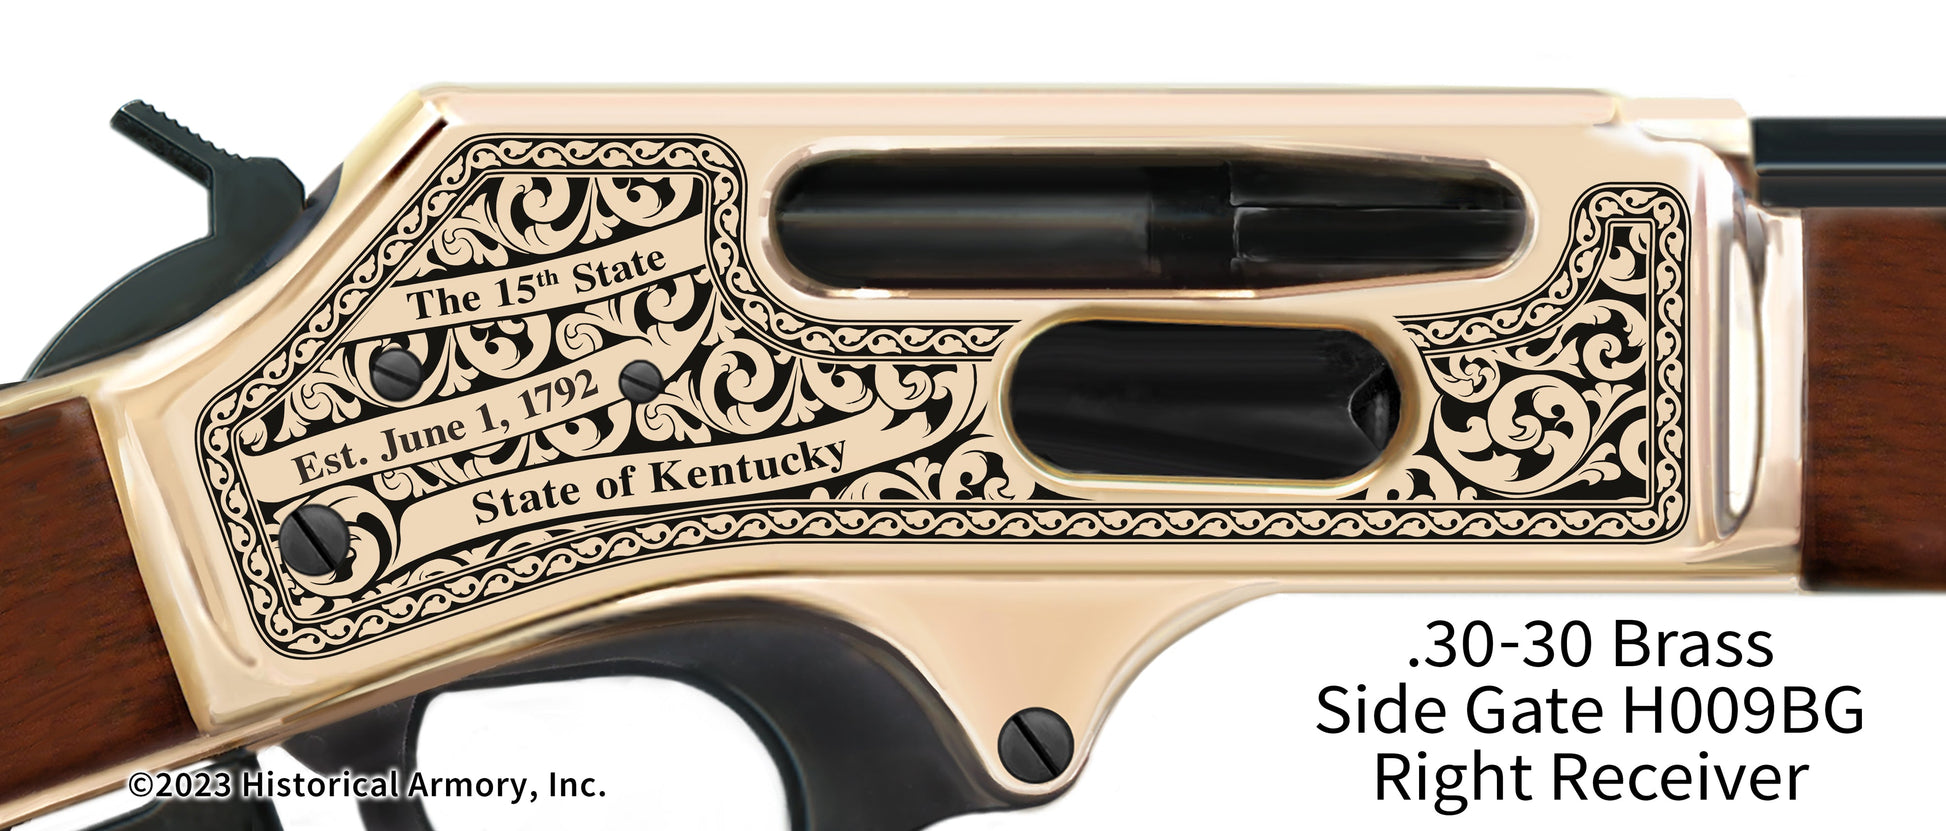 Shelby County Kentucky Engraved Henry .30-30 Brass Side Gate Rifle